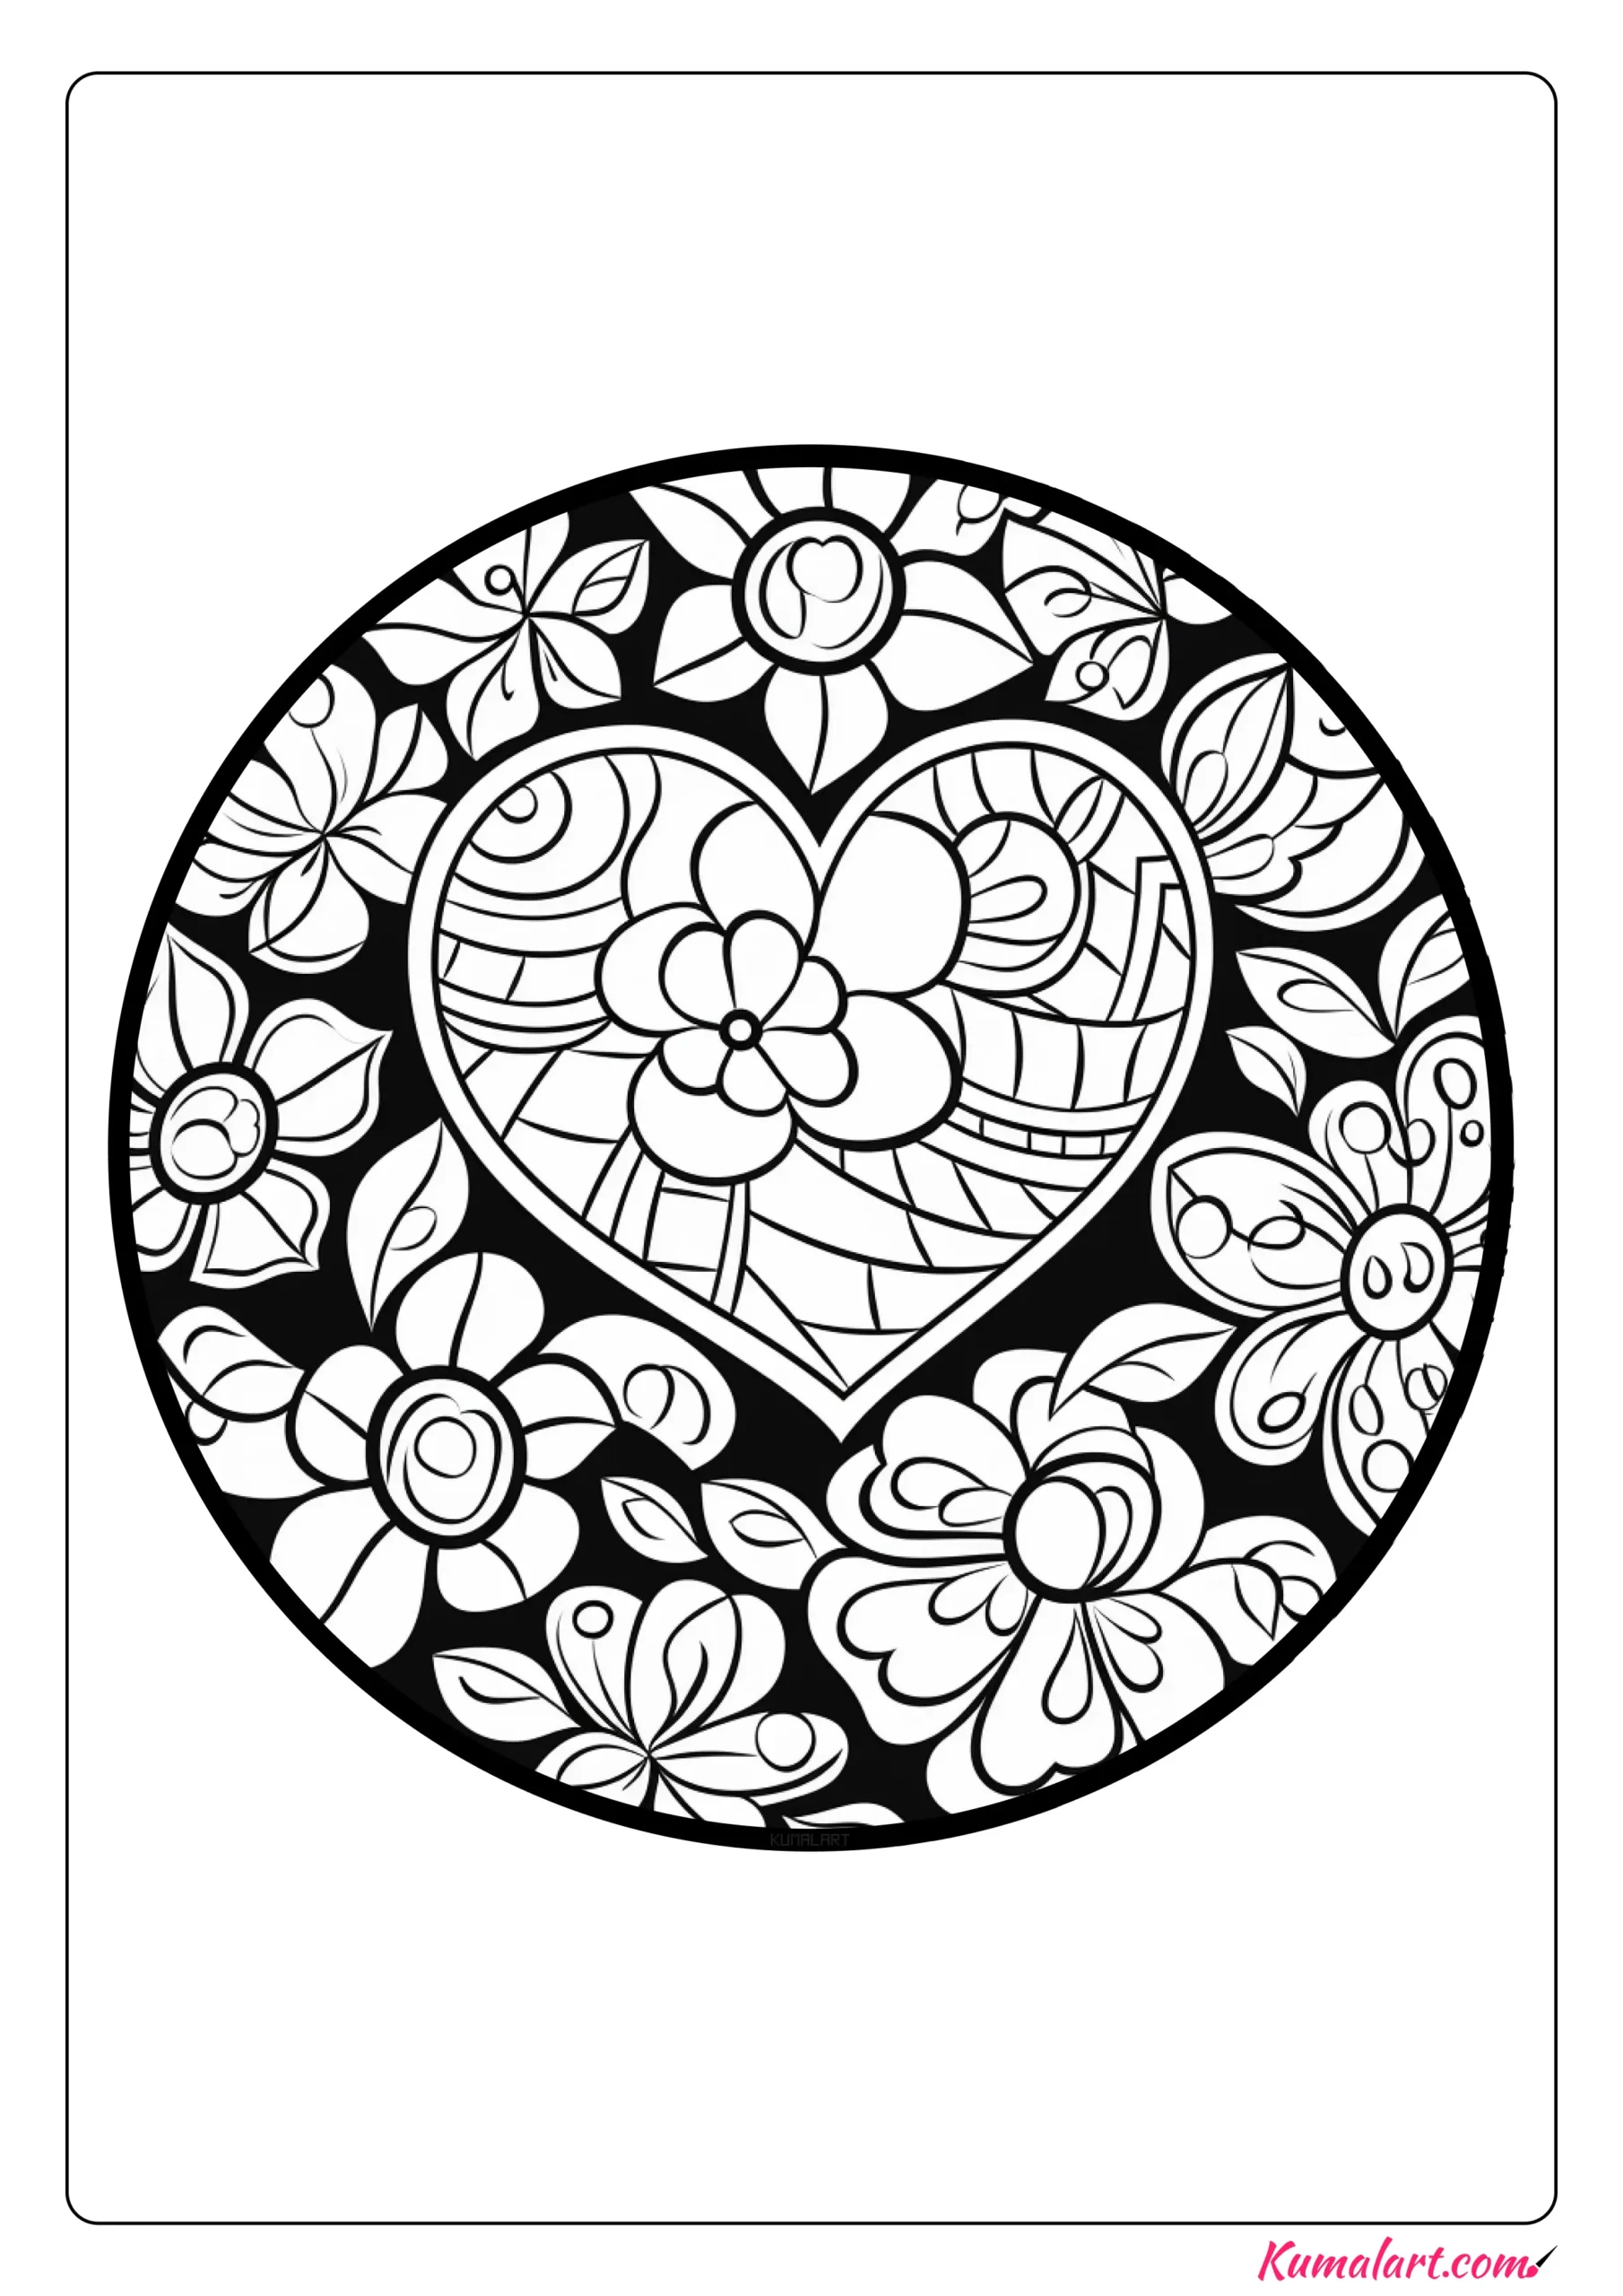 Floral Valentine’s Day Coloring Page